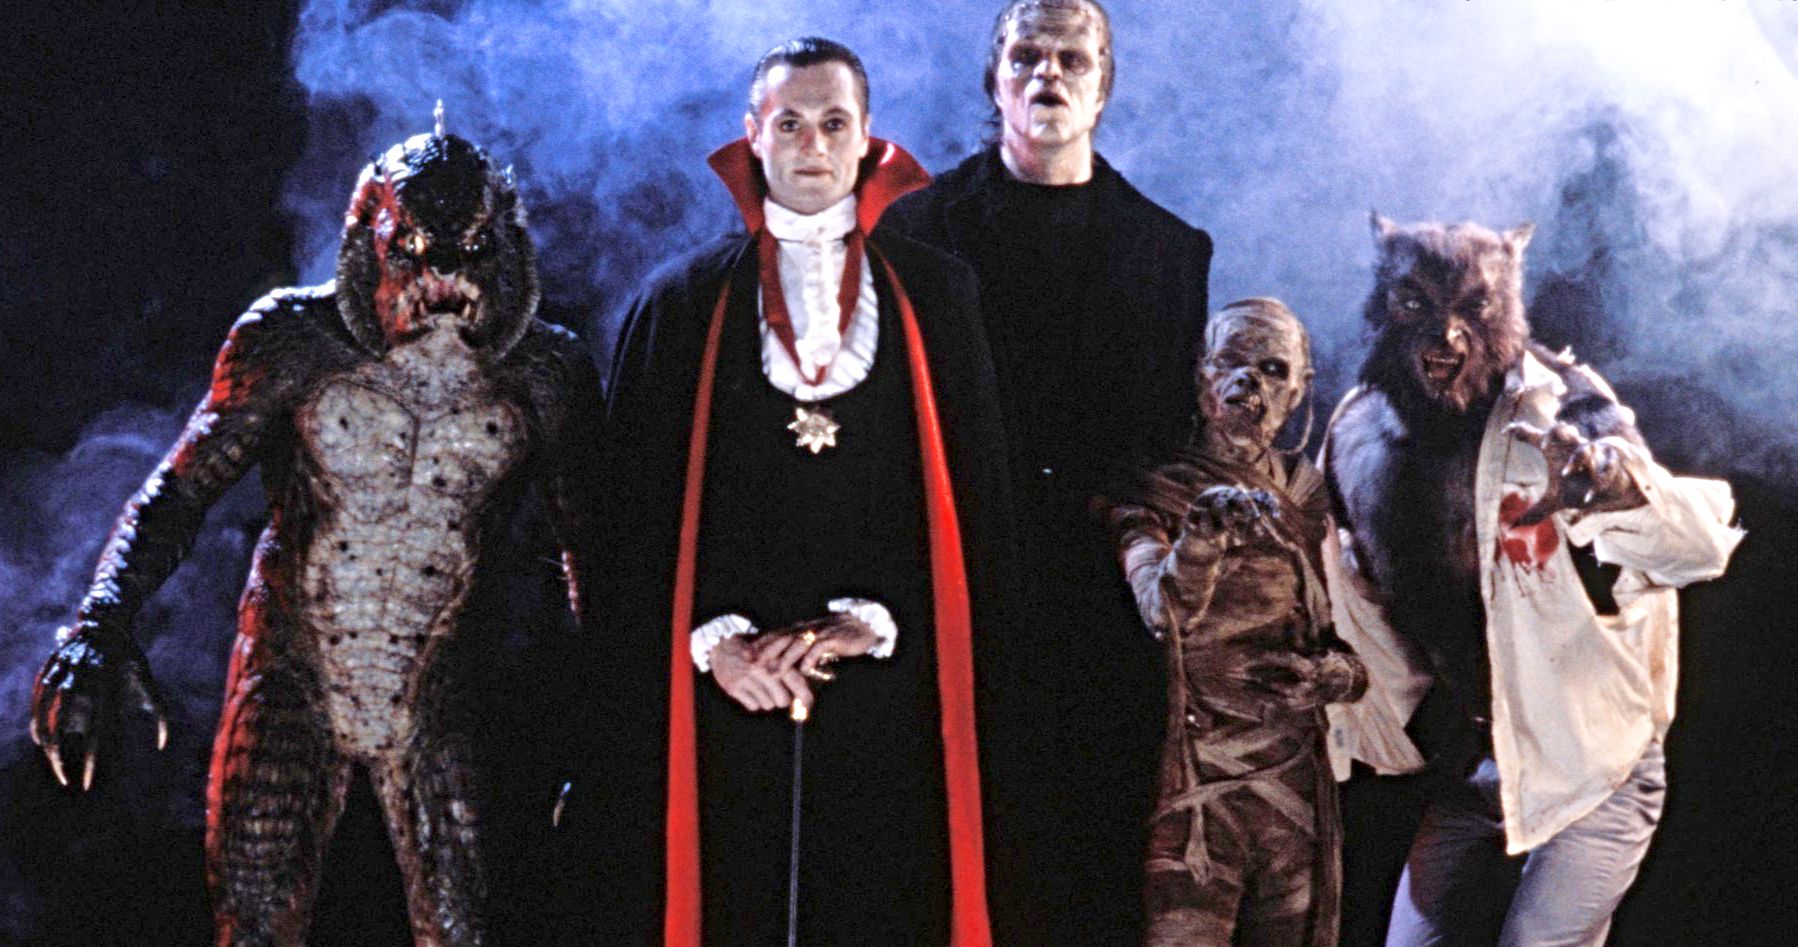 Why We're Not Getting Monster Squad 2 or a TV Show Spin-Off